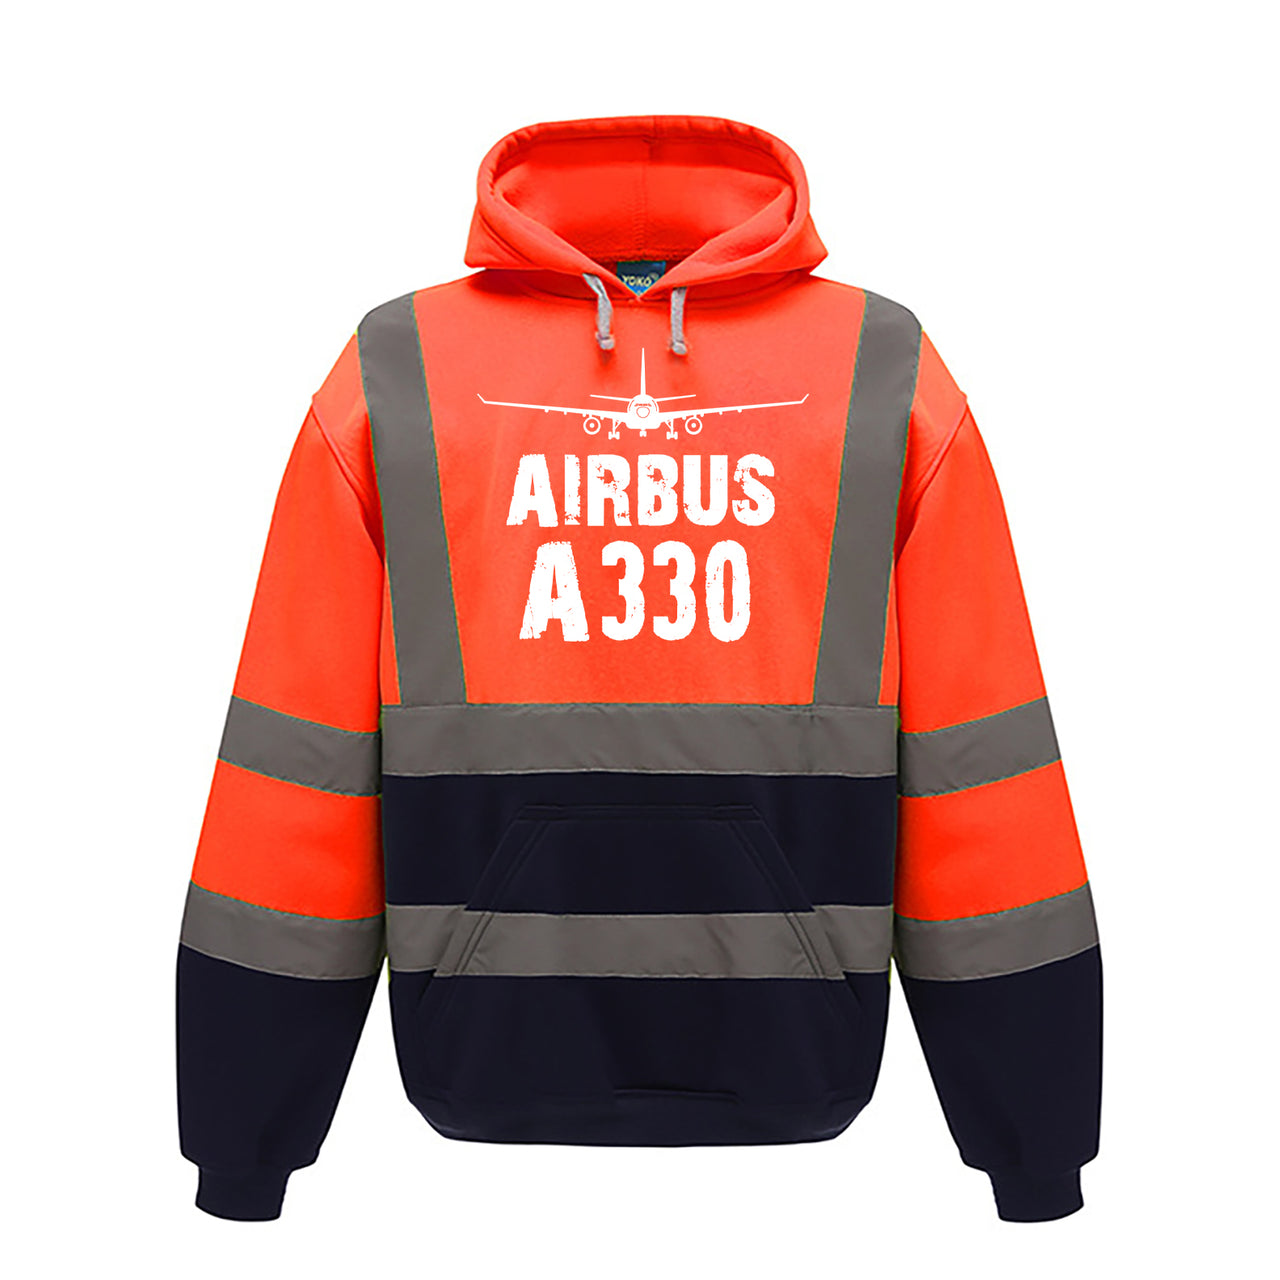 Airbus A330 & Plane Designed Reflective Hoodies